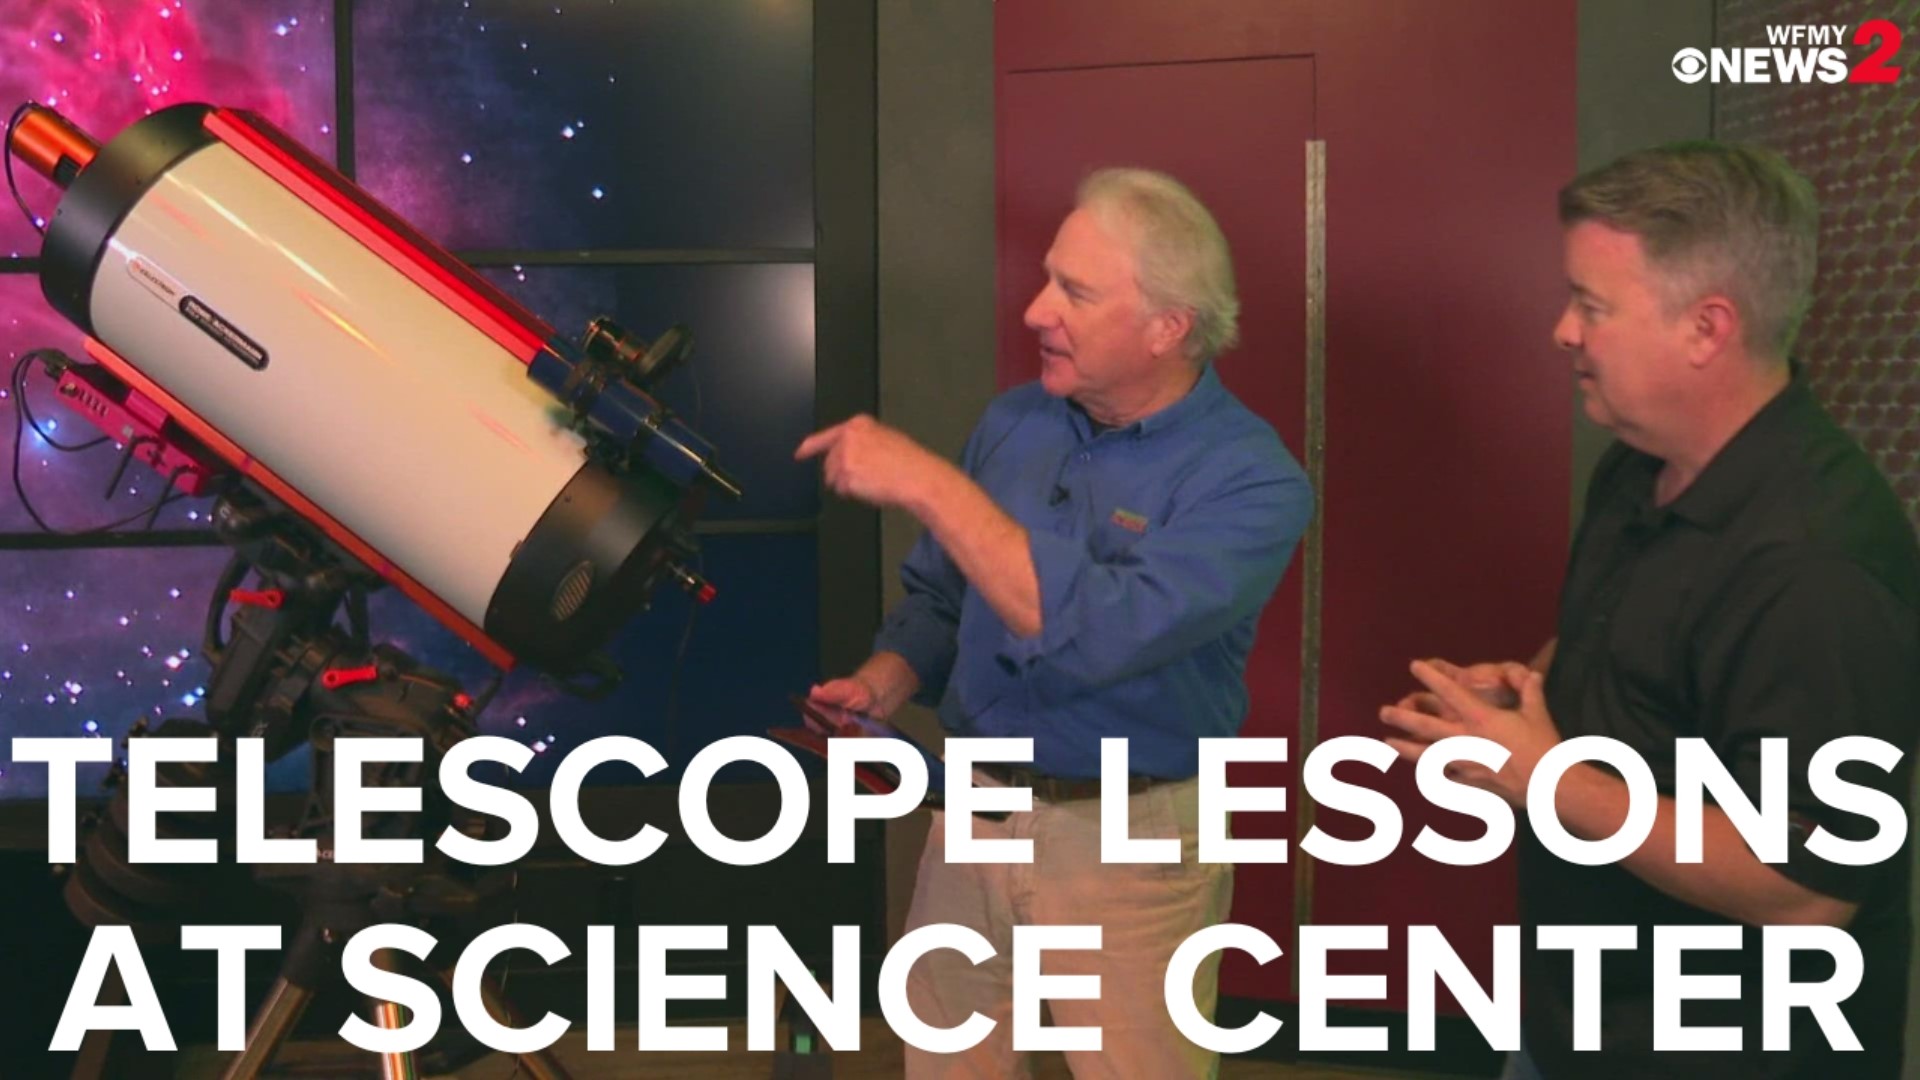 The Greensboro Science Center has a program with a telescope allowing you to see the stars thousands of miles away.